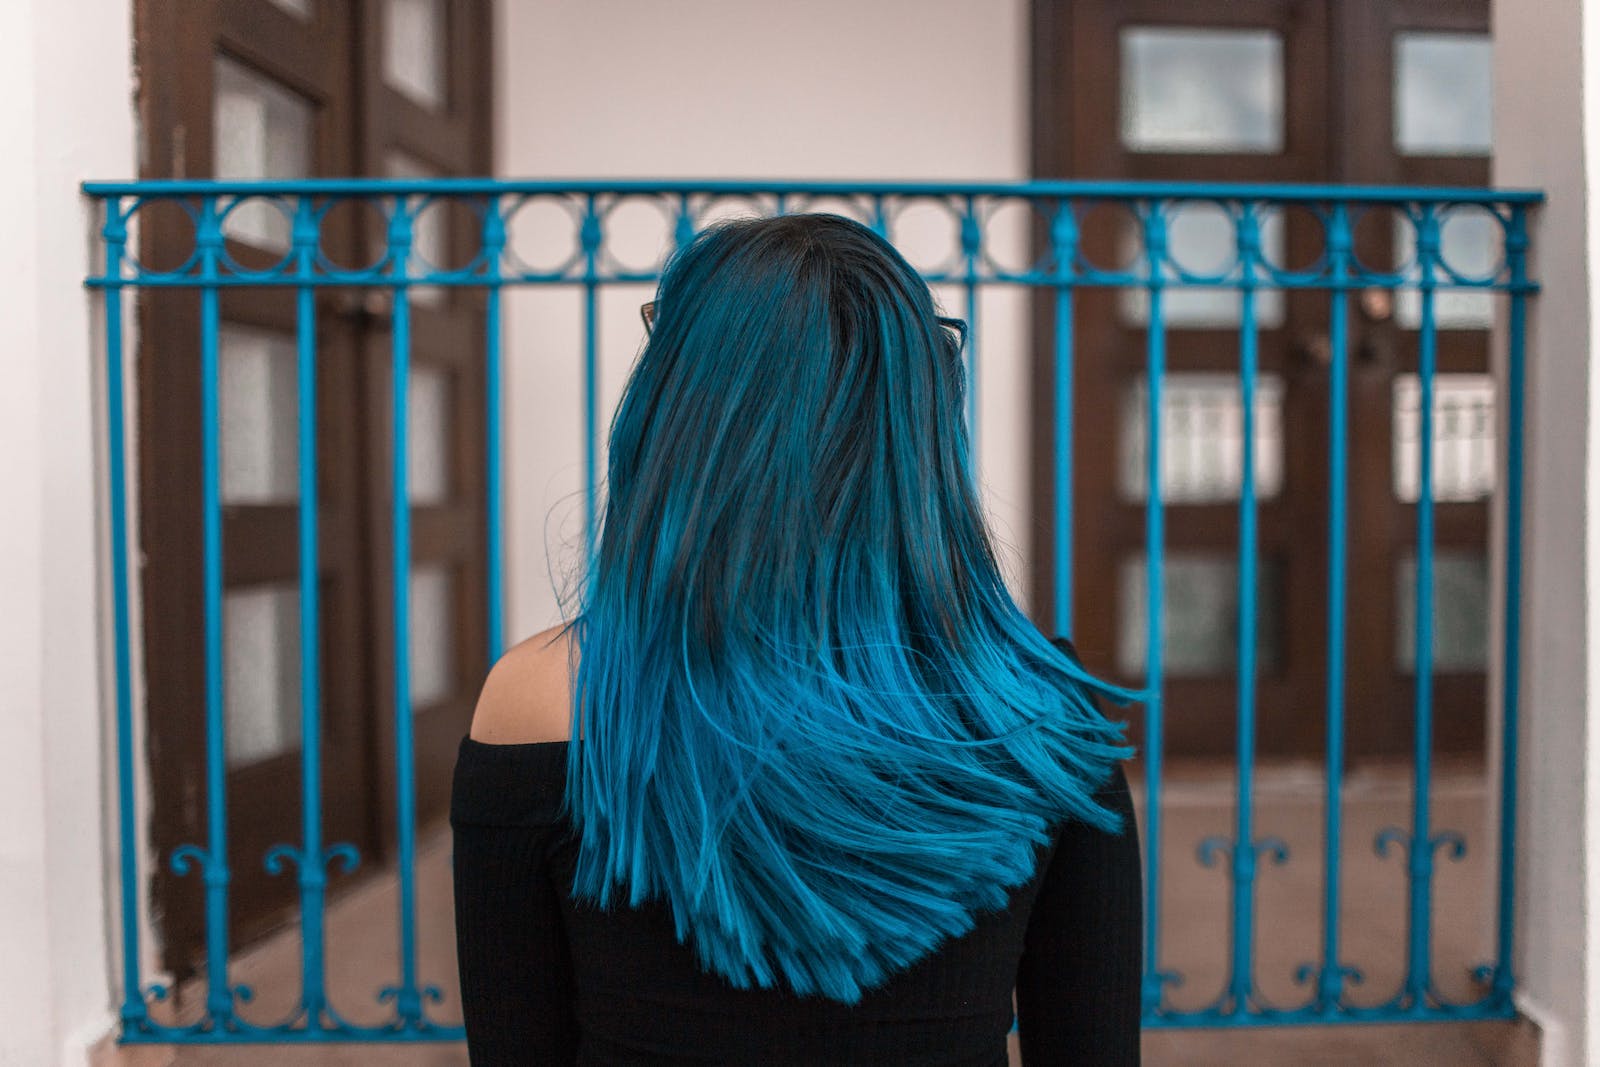 Blue Haired Woman Facing Metal Fence